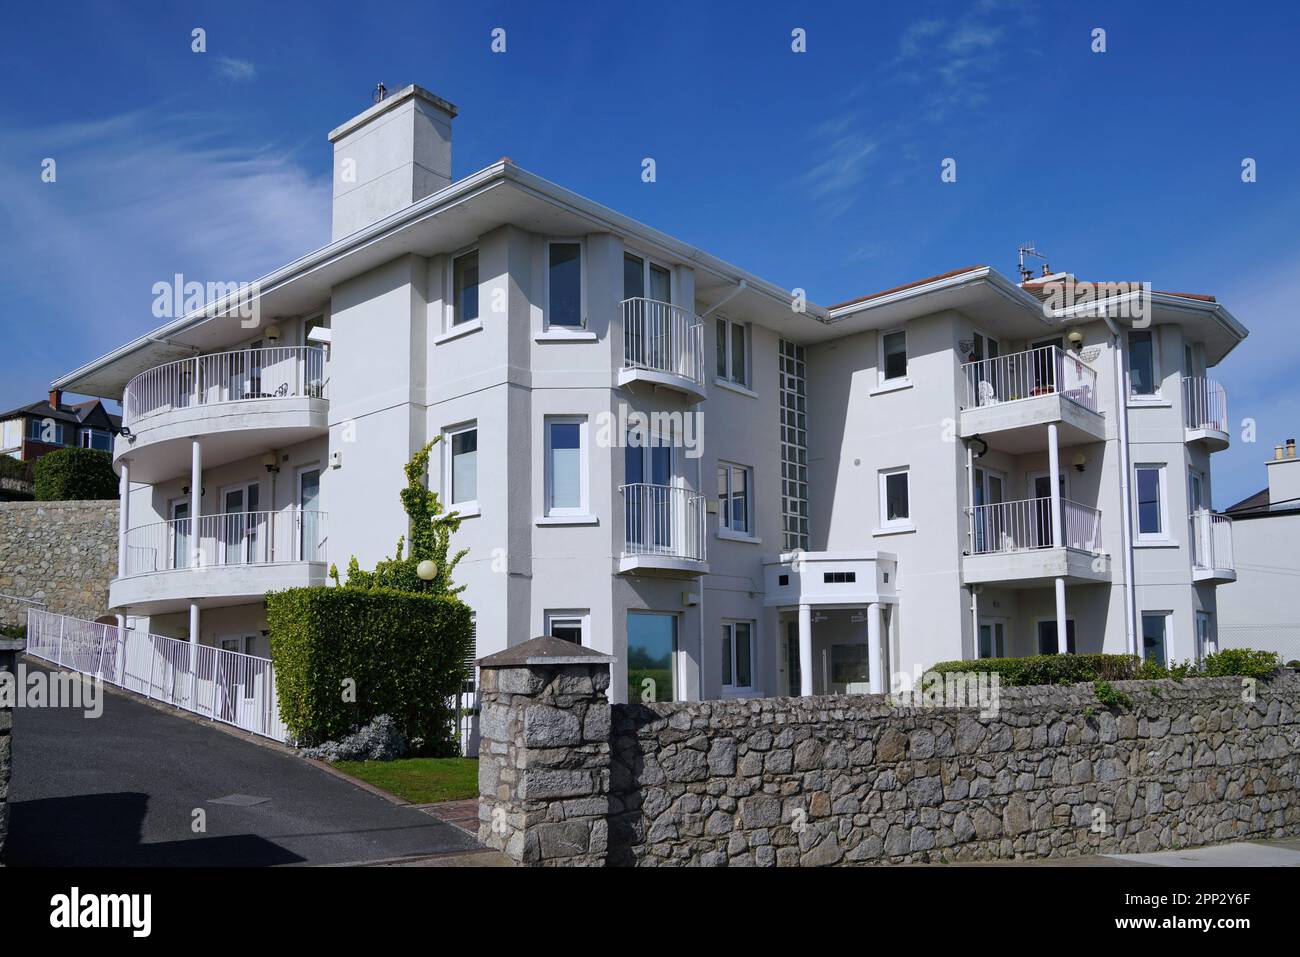 Small apartment building with white stucco exterior Stock Photo